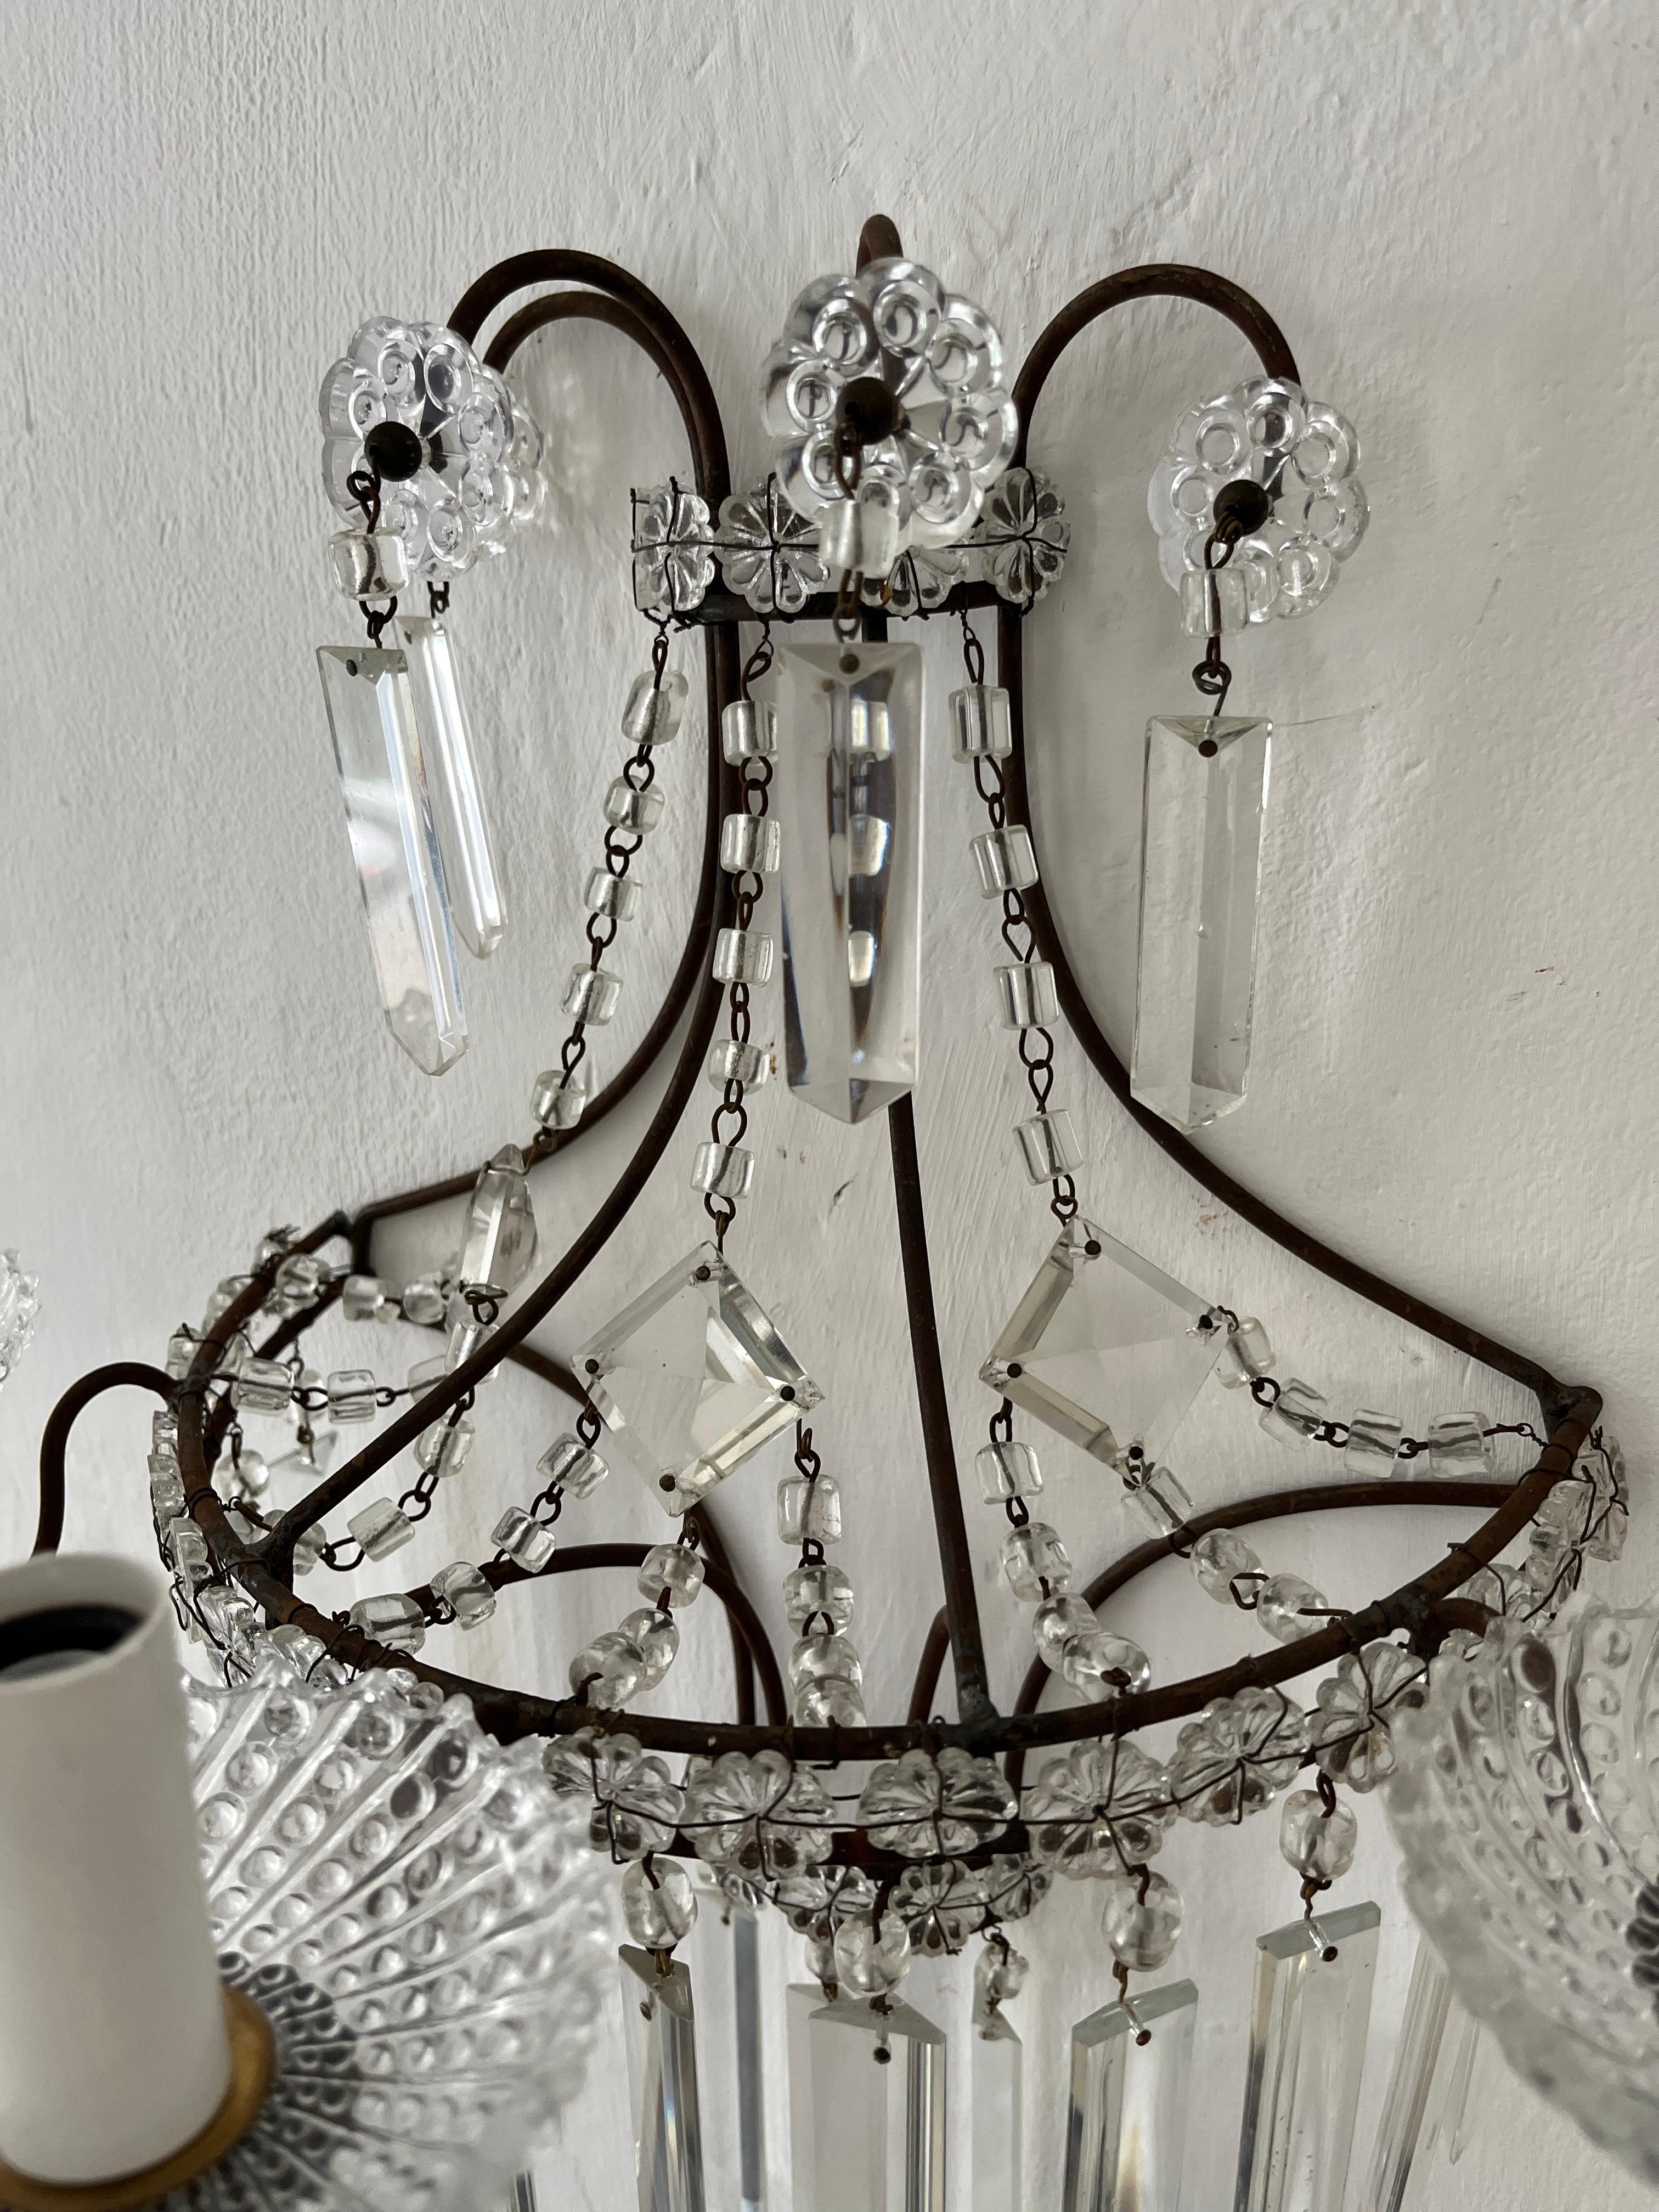 French Crystal Prisms 3 Light Extremely Old and Stunning Sconces c 1900 For Sale 2